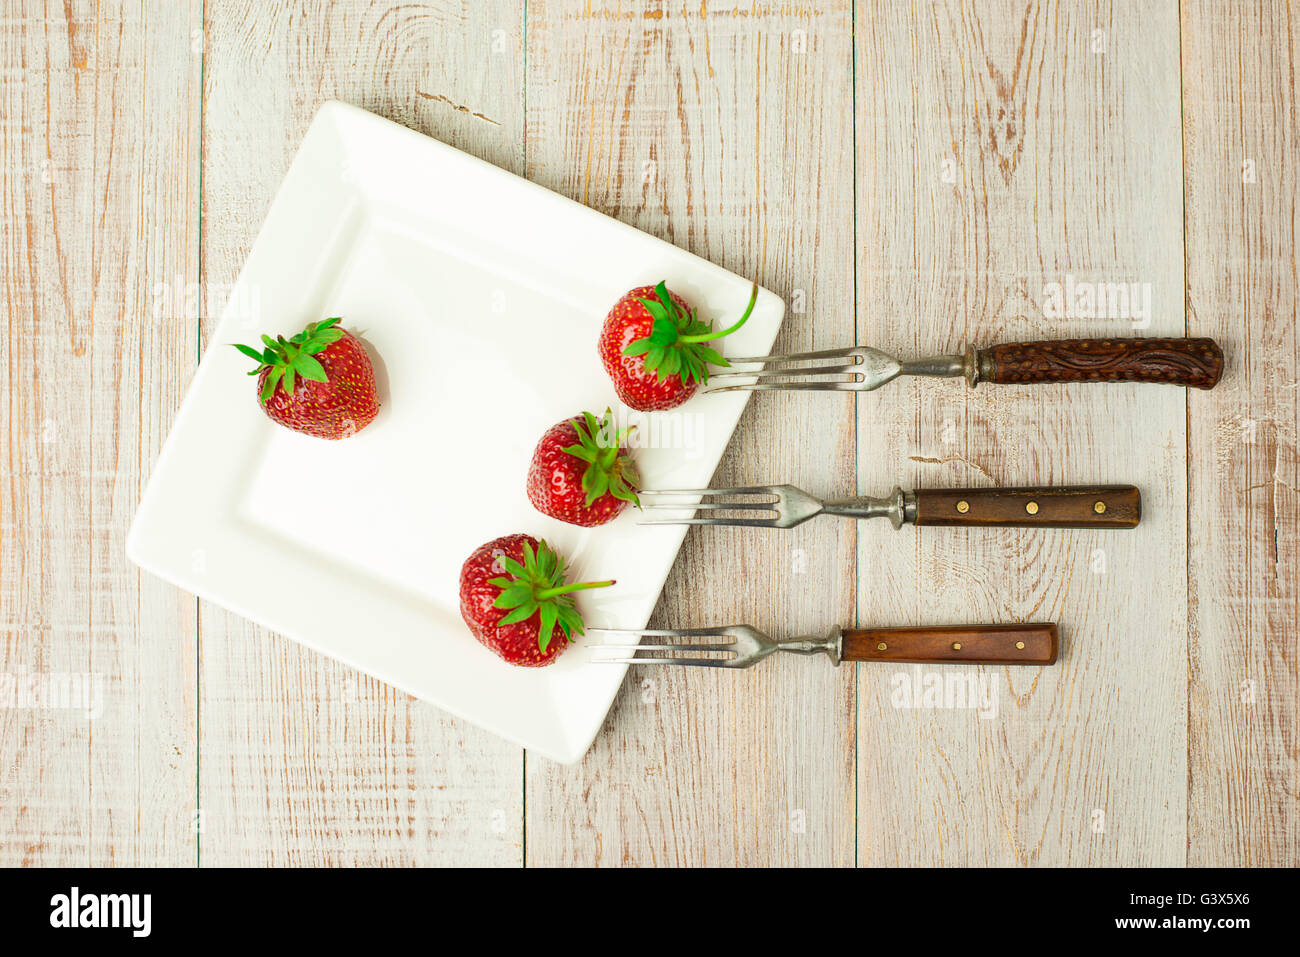 Three forks and ripe red strawberries on a white plate Stock Photo